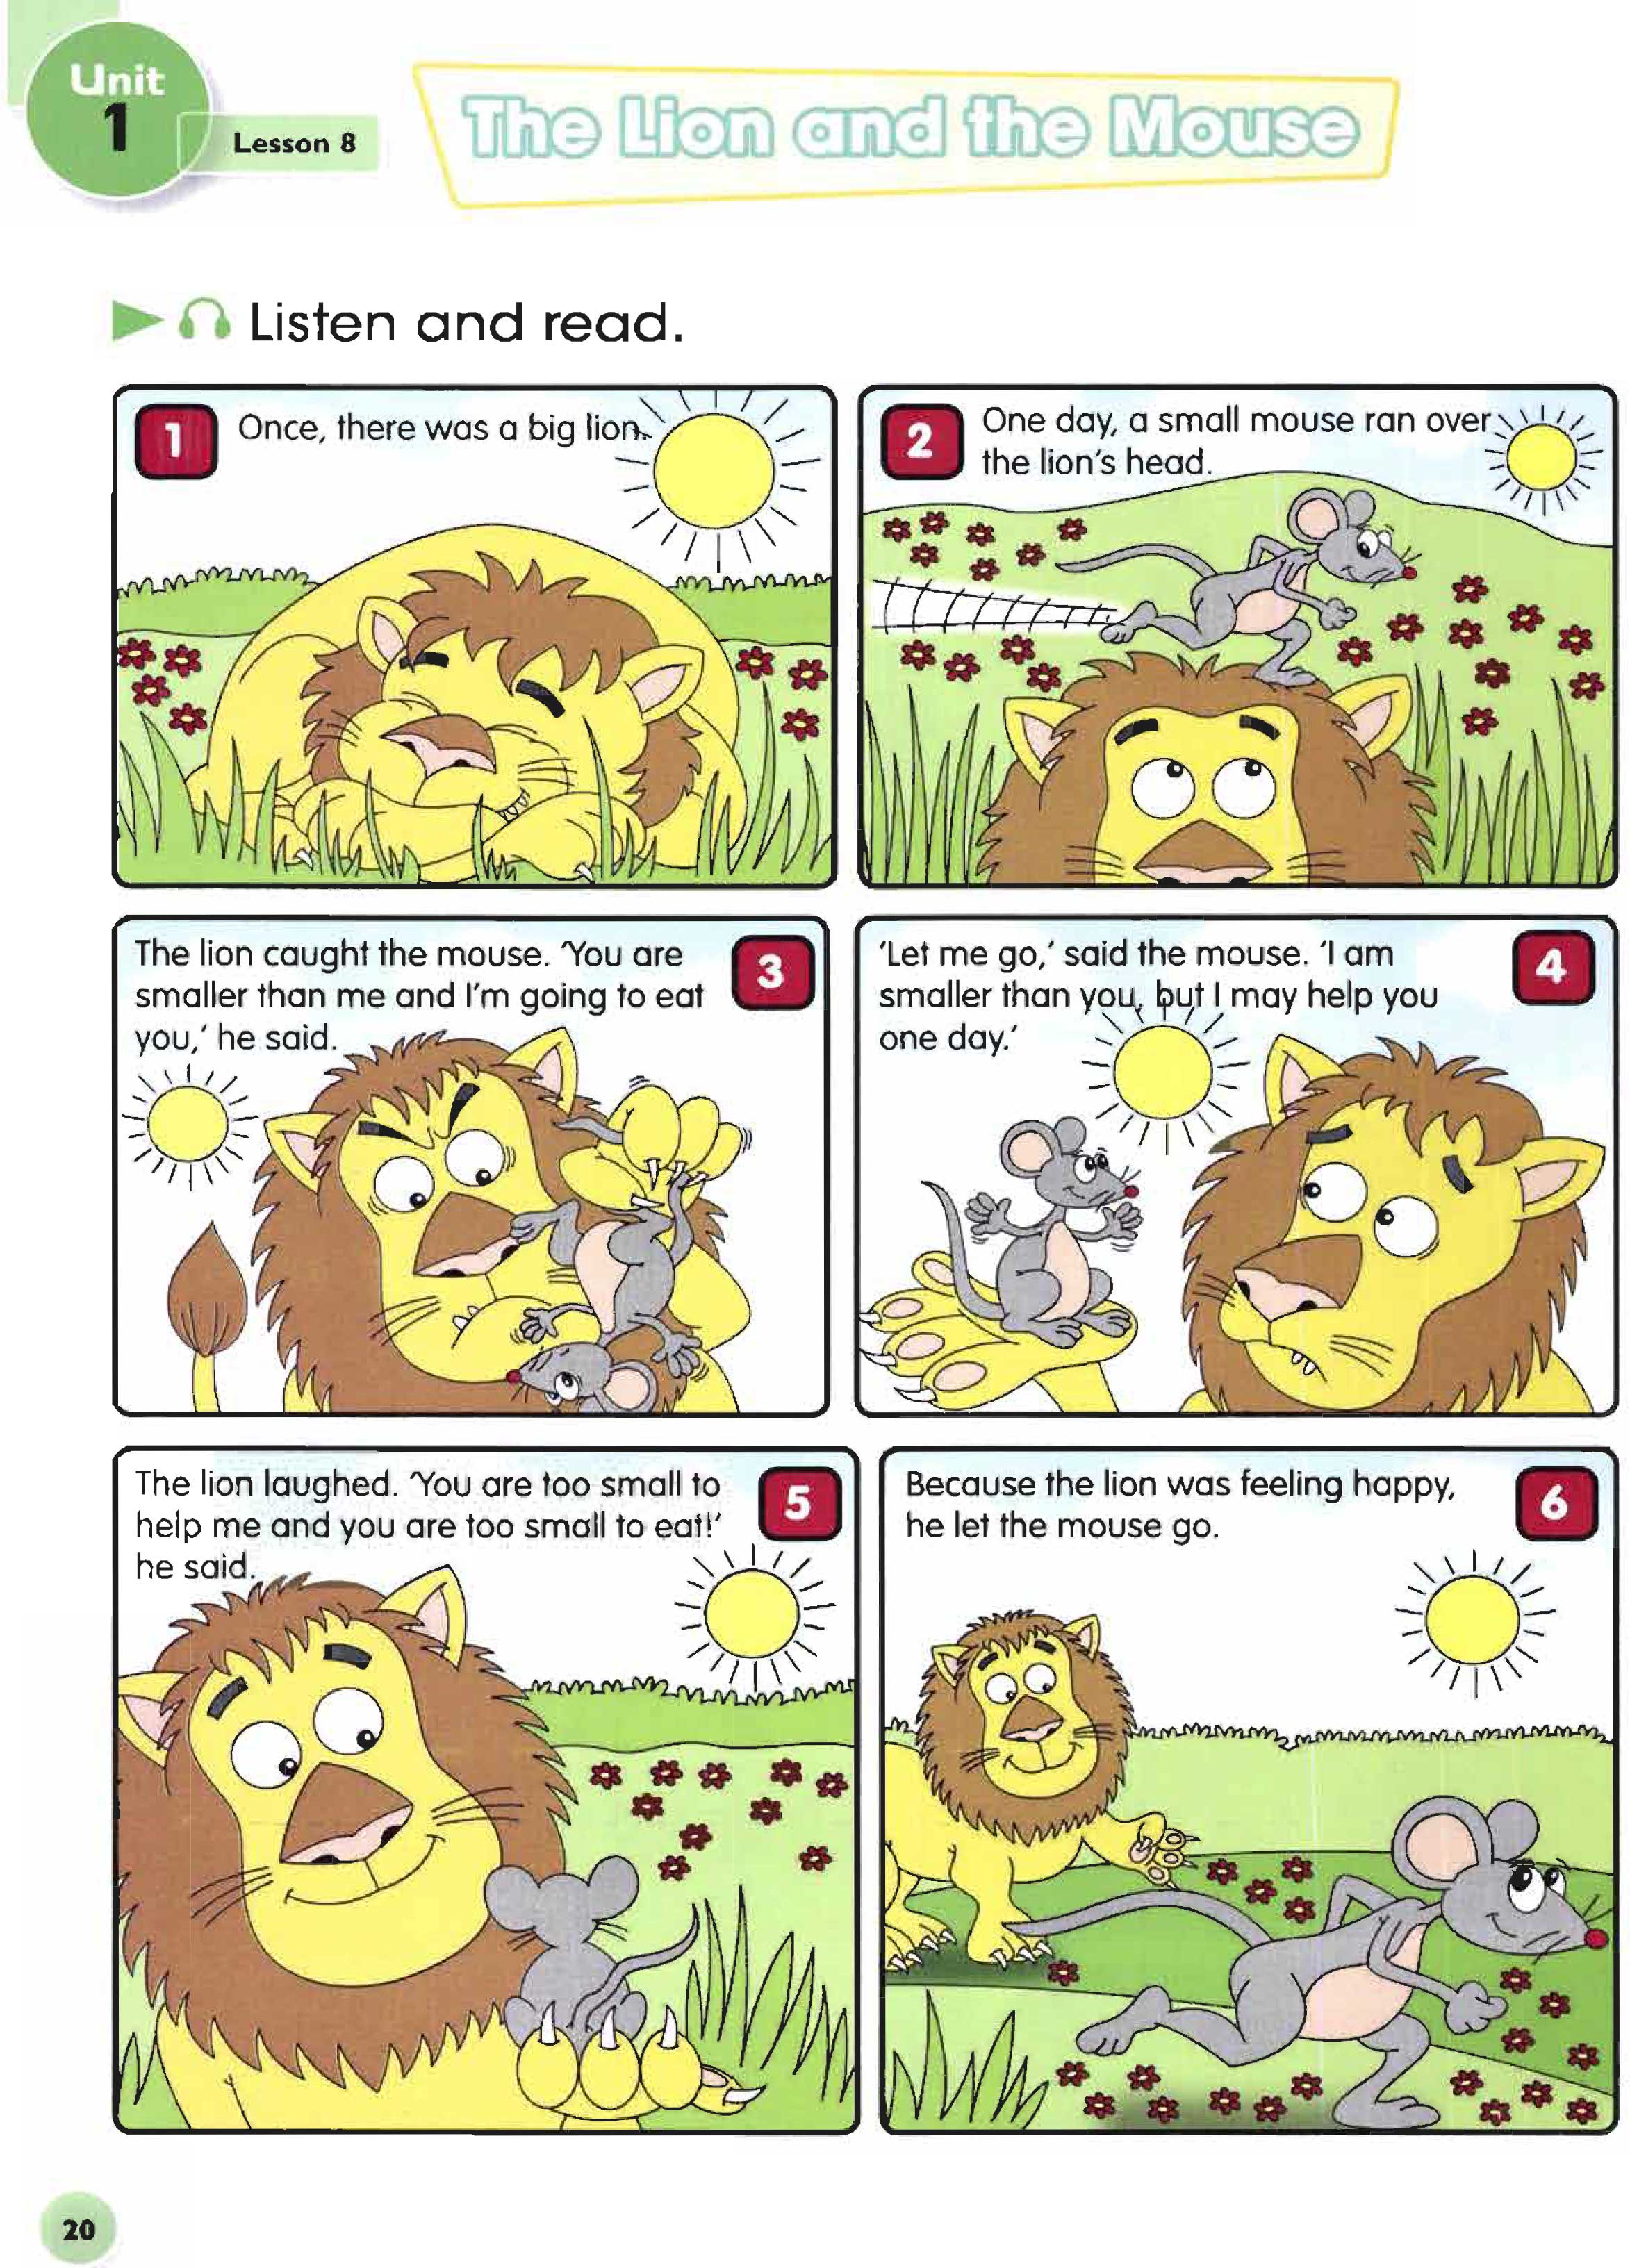 Lesson8:The Lion and the Mouse